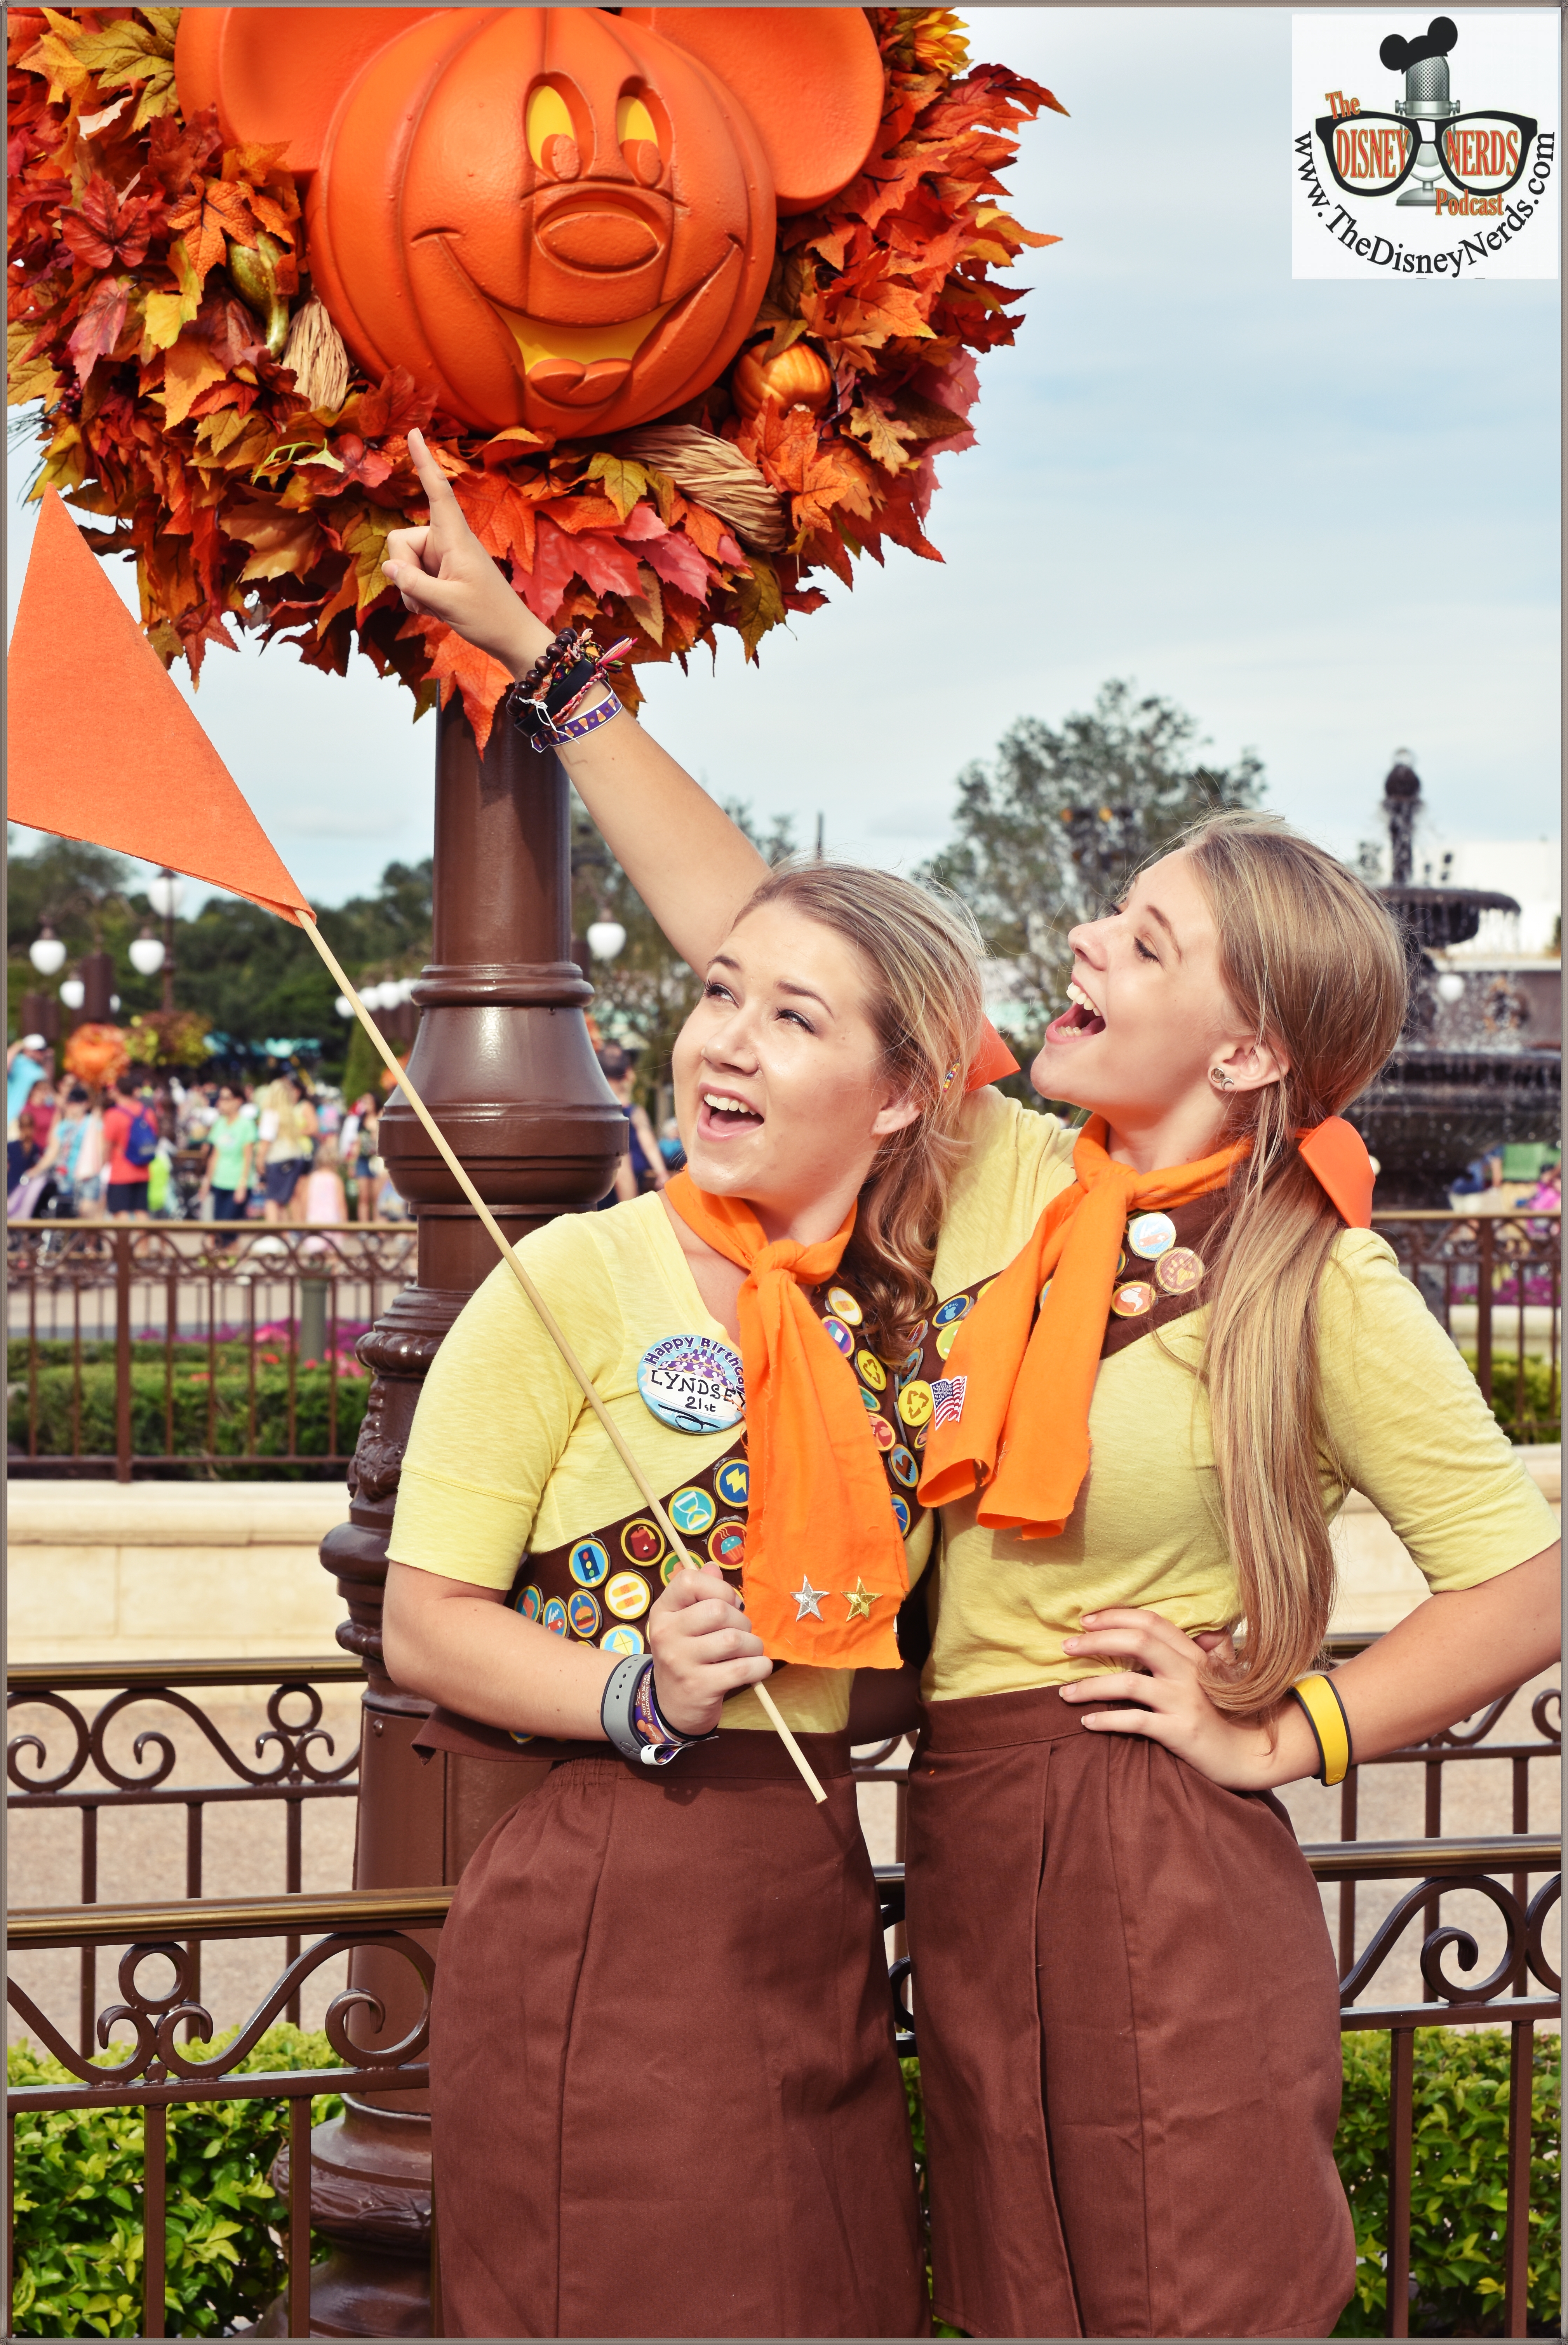 MNSSHP Costumes, on the up and up!